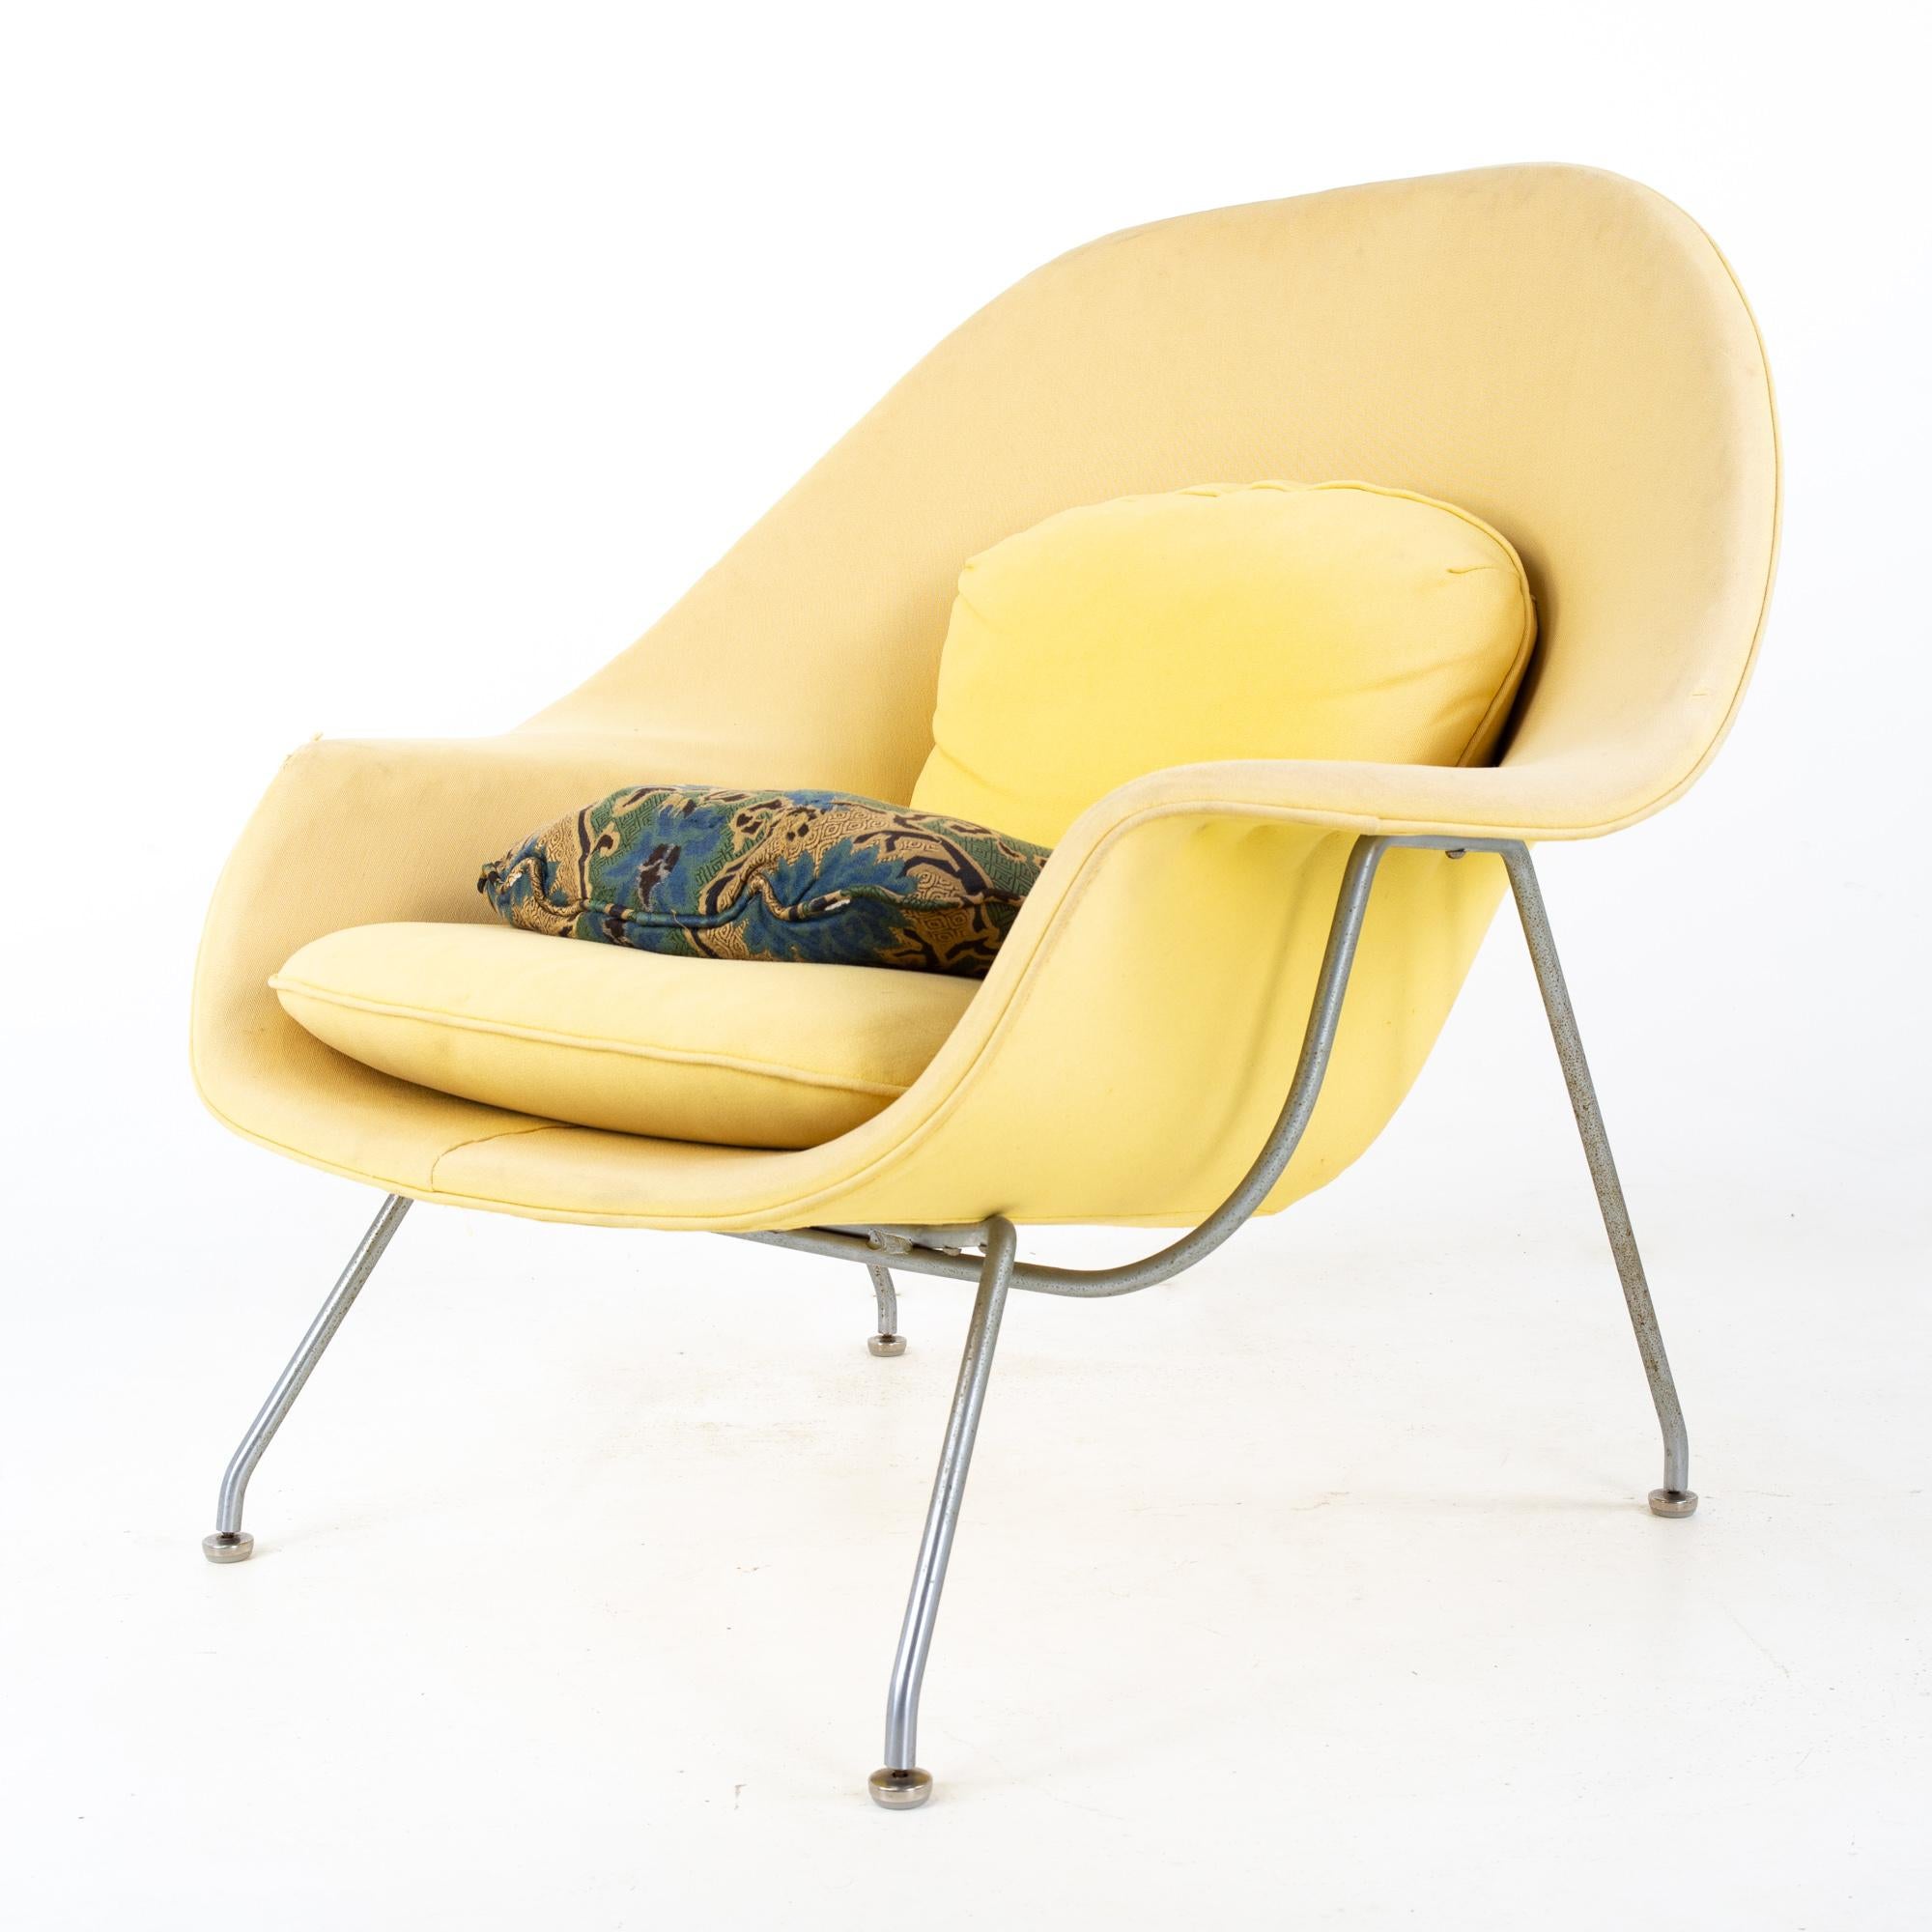 Early Eero Saarinen for Knoll mid century womb lounge chair
Lounge chair measures: 40 wide x 31.25 deep x 36 high, with a seat height of 16 inches and arm height of 20.5 inches

All pieces of furniture can be had in what we call restored vintage